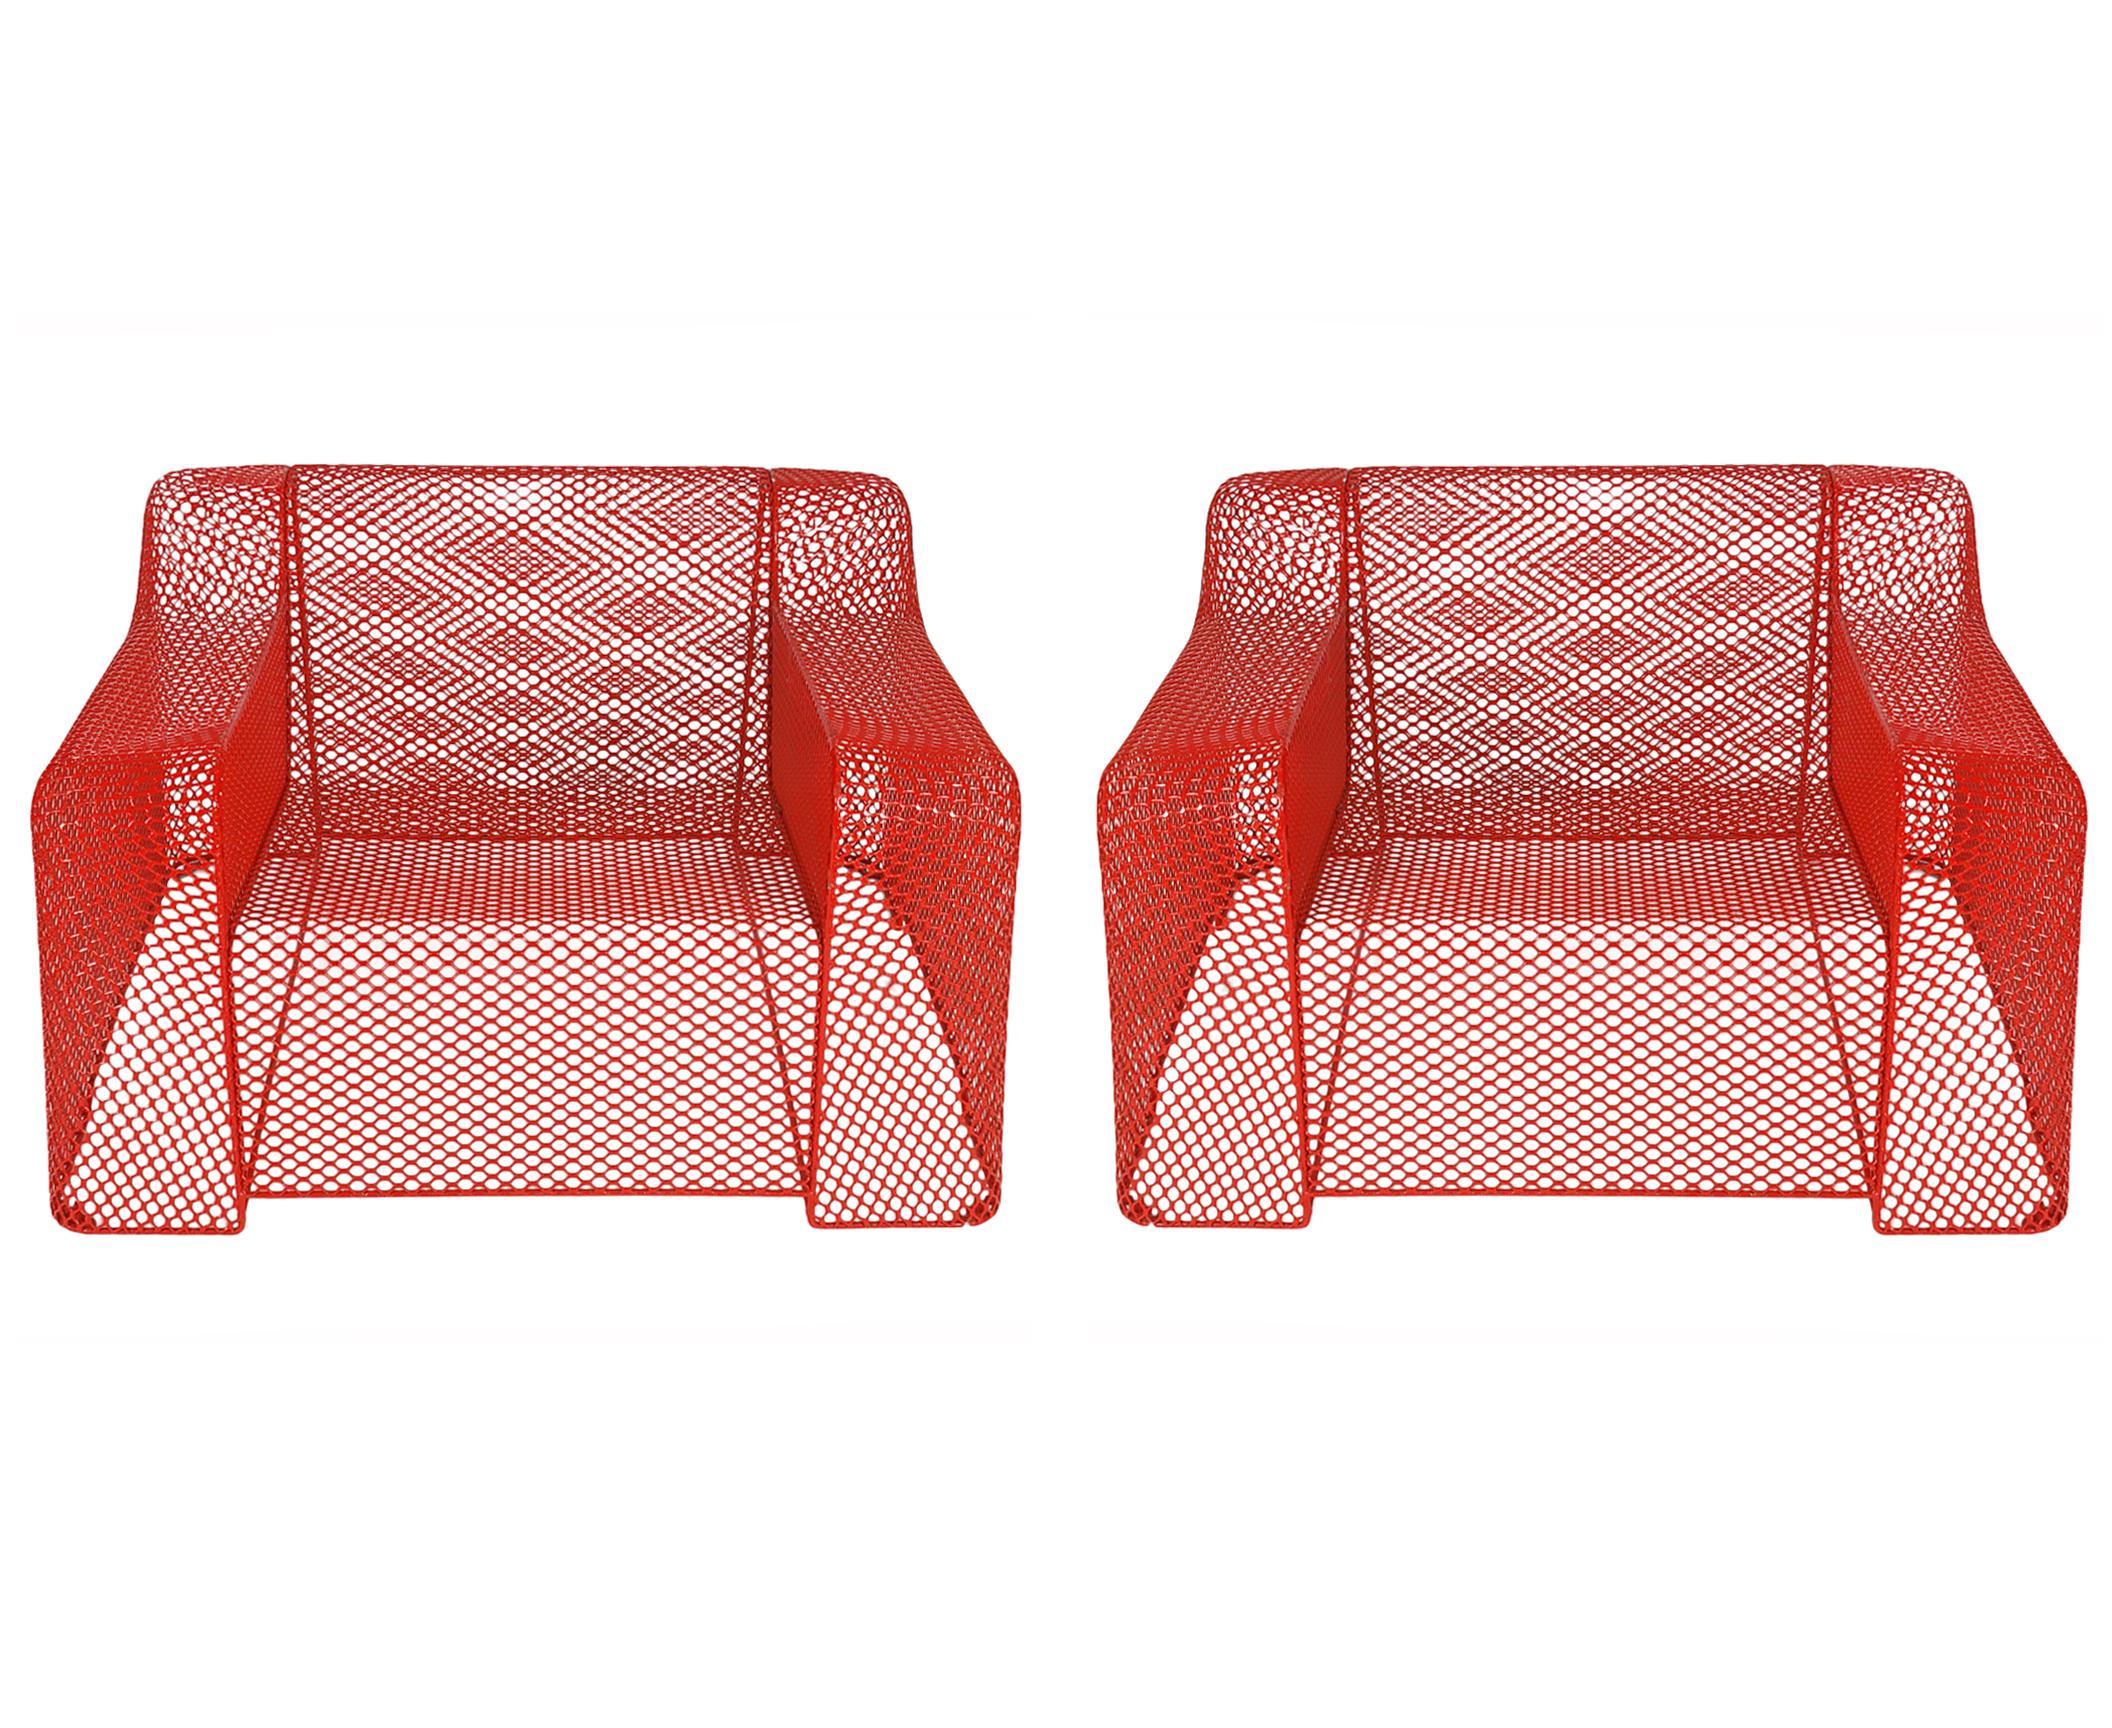 Late 20th Century Midcentury Italian Postmodern Red Mesh Wire Indoor Outdoor Patio Lounge Chairs